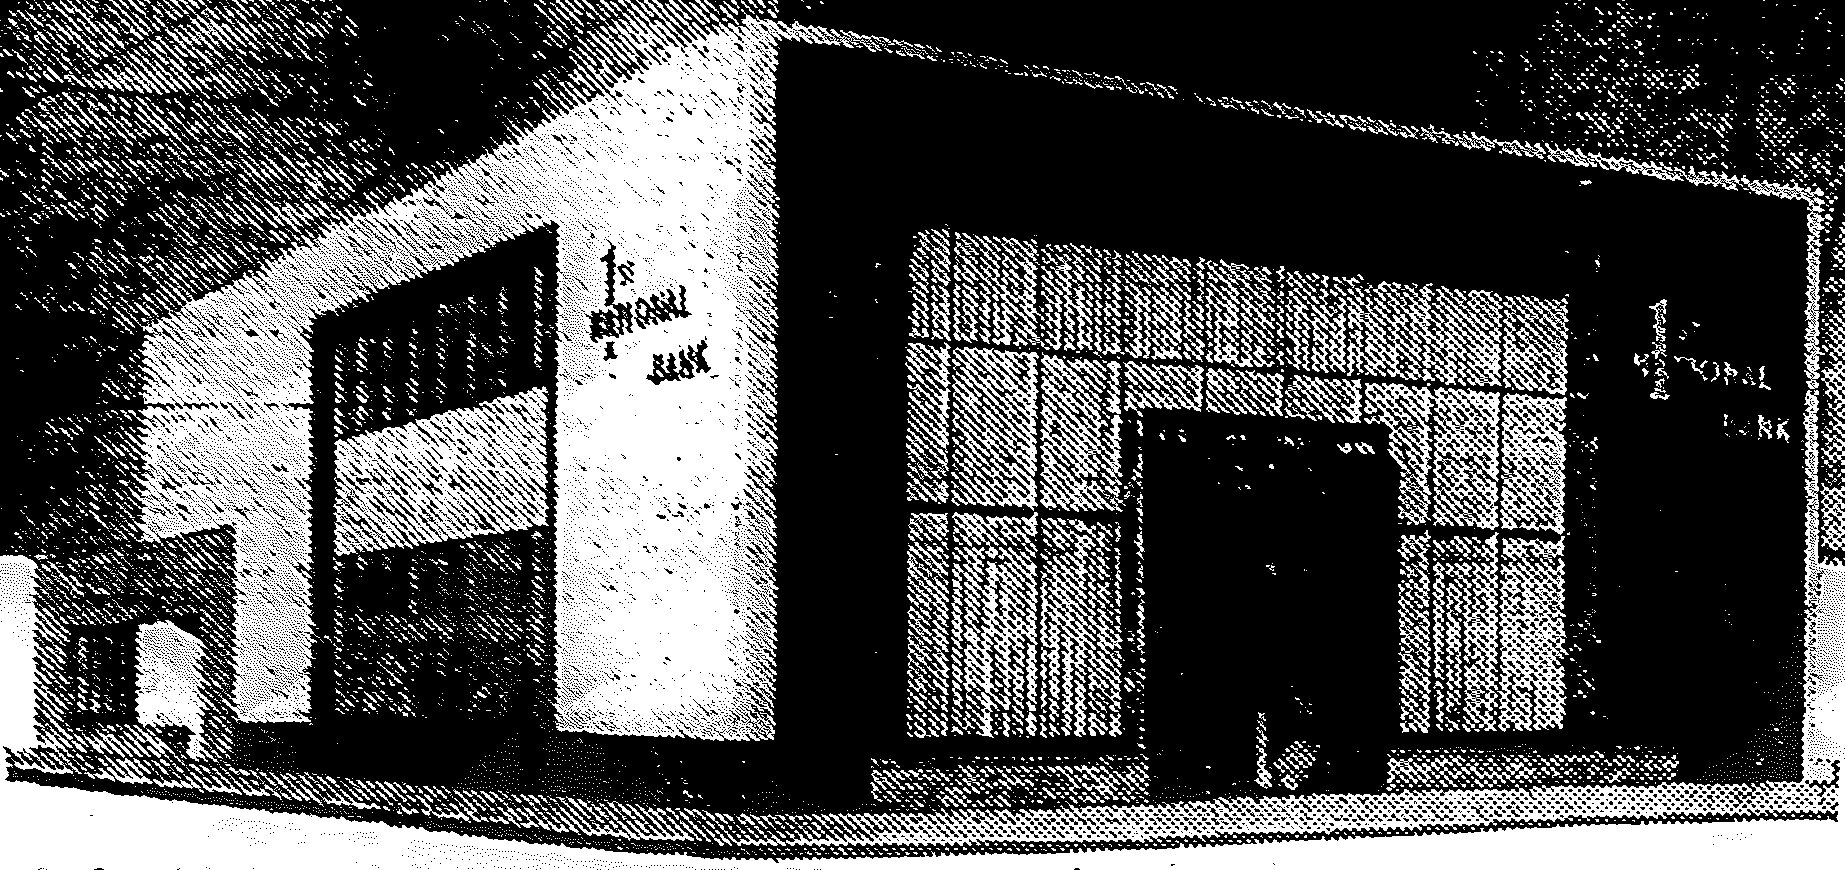 First National Bank of Gainesville (FL) 1955 from The American Banker Reprinted with Permission from SourceMedia.jpg